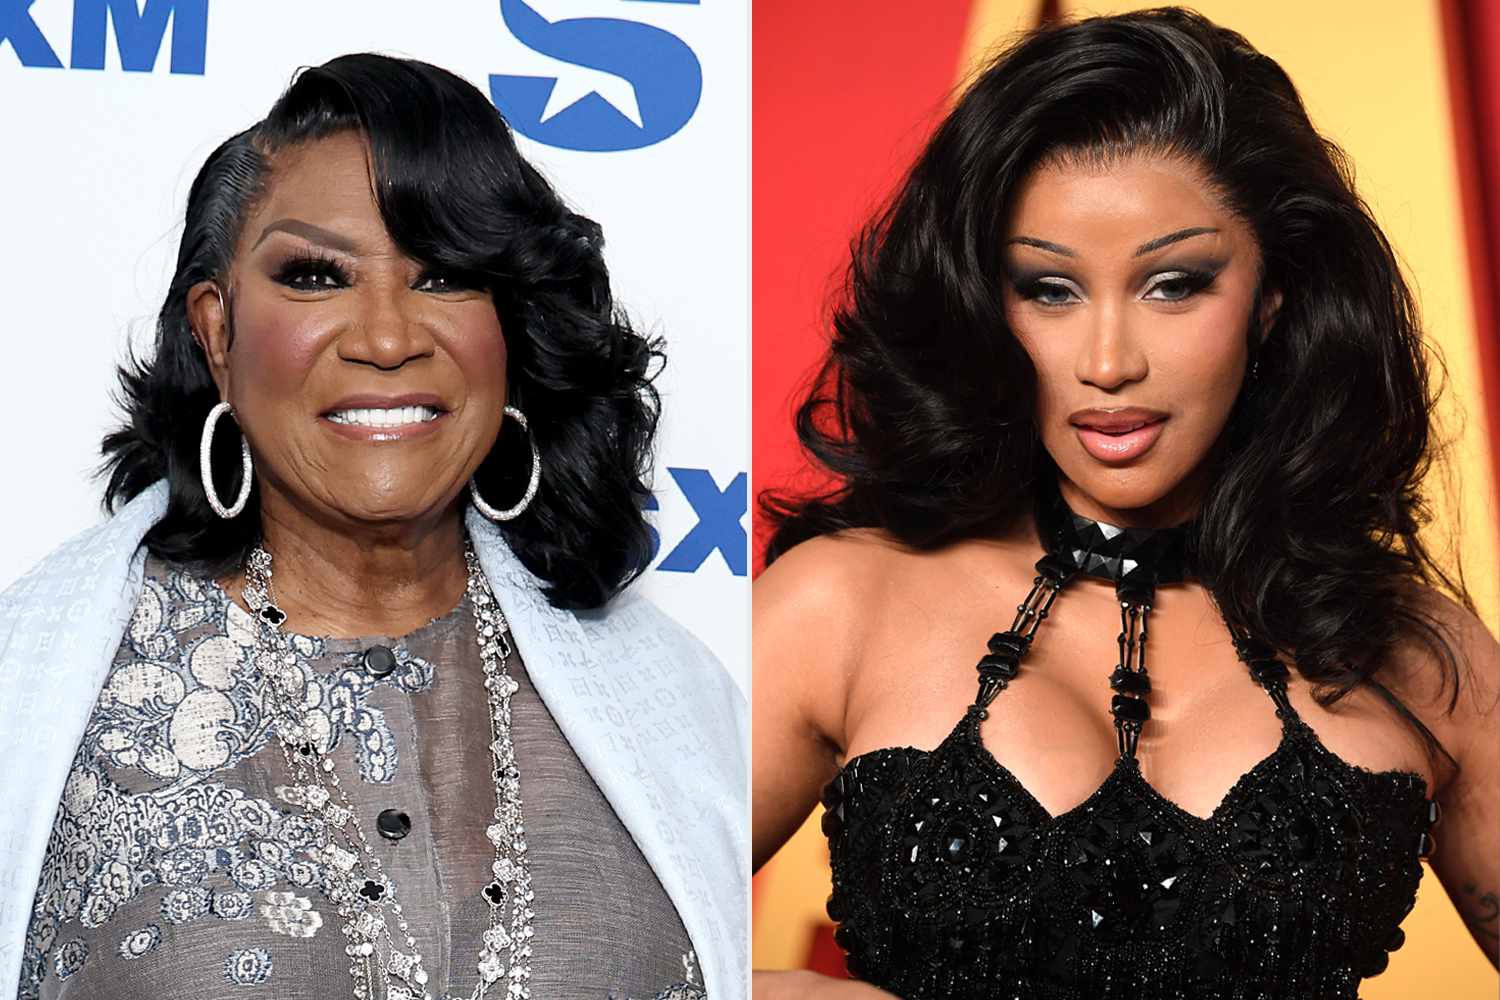 Patti LaBelle Teases a Possible Collaboration with Her 'New Best Friend' Cardi B